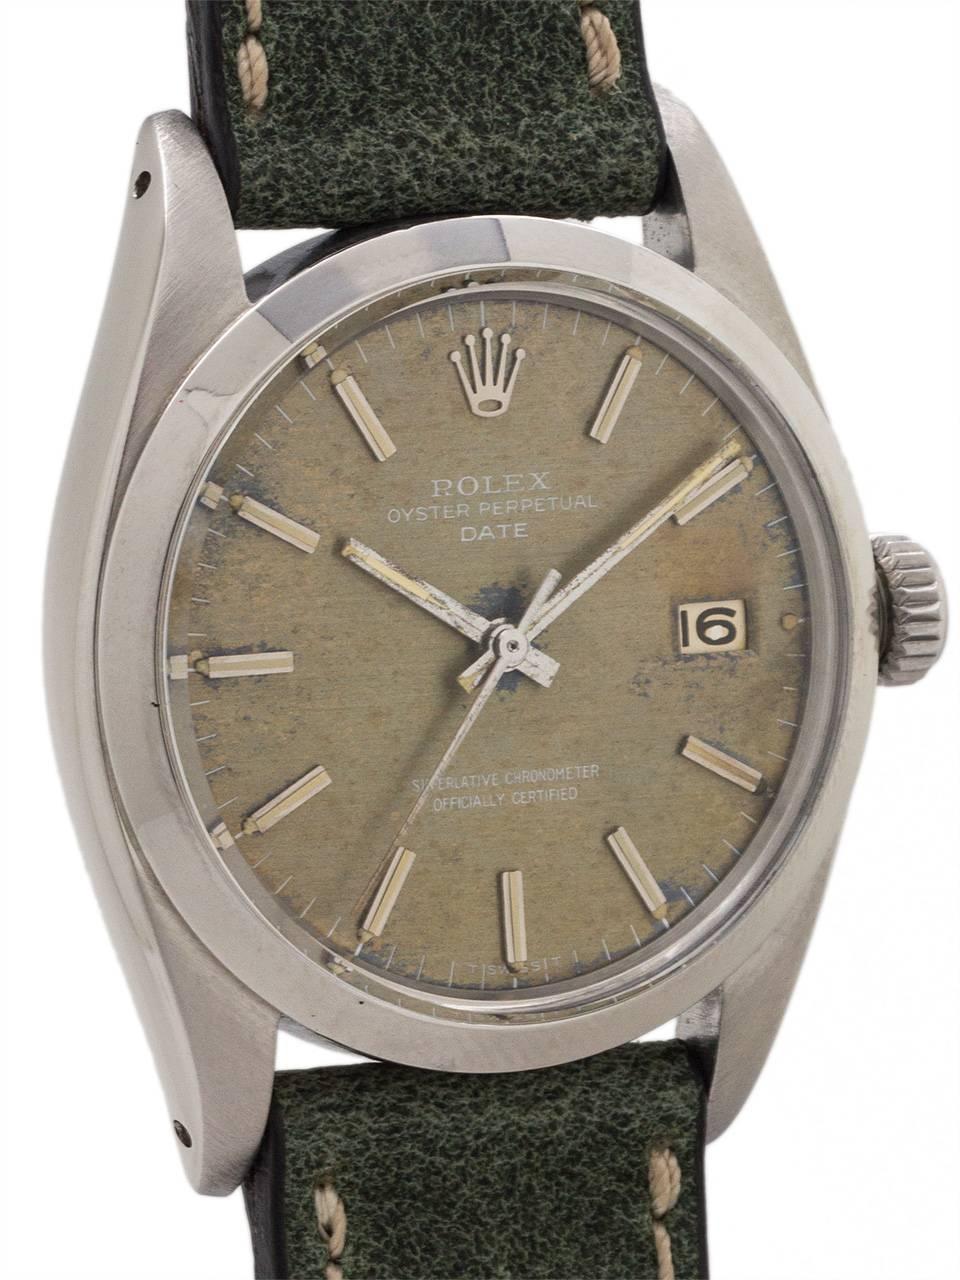 
Rolex Stainless Steel Oyster Perpetual Date ref 1500 serial #1.3 million circa 1966. 34mm diameter Oyster case with smooth bezel and acrylic crystal. Featuring a “distressed” original dial that has turned to a weathered, silver green hue. Dial